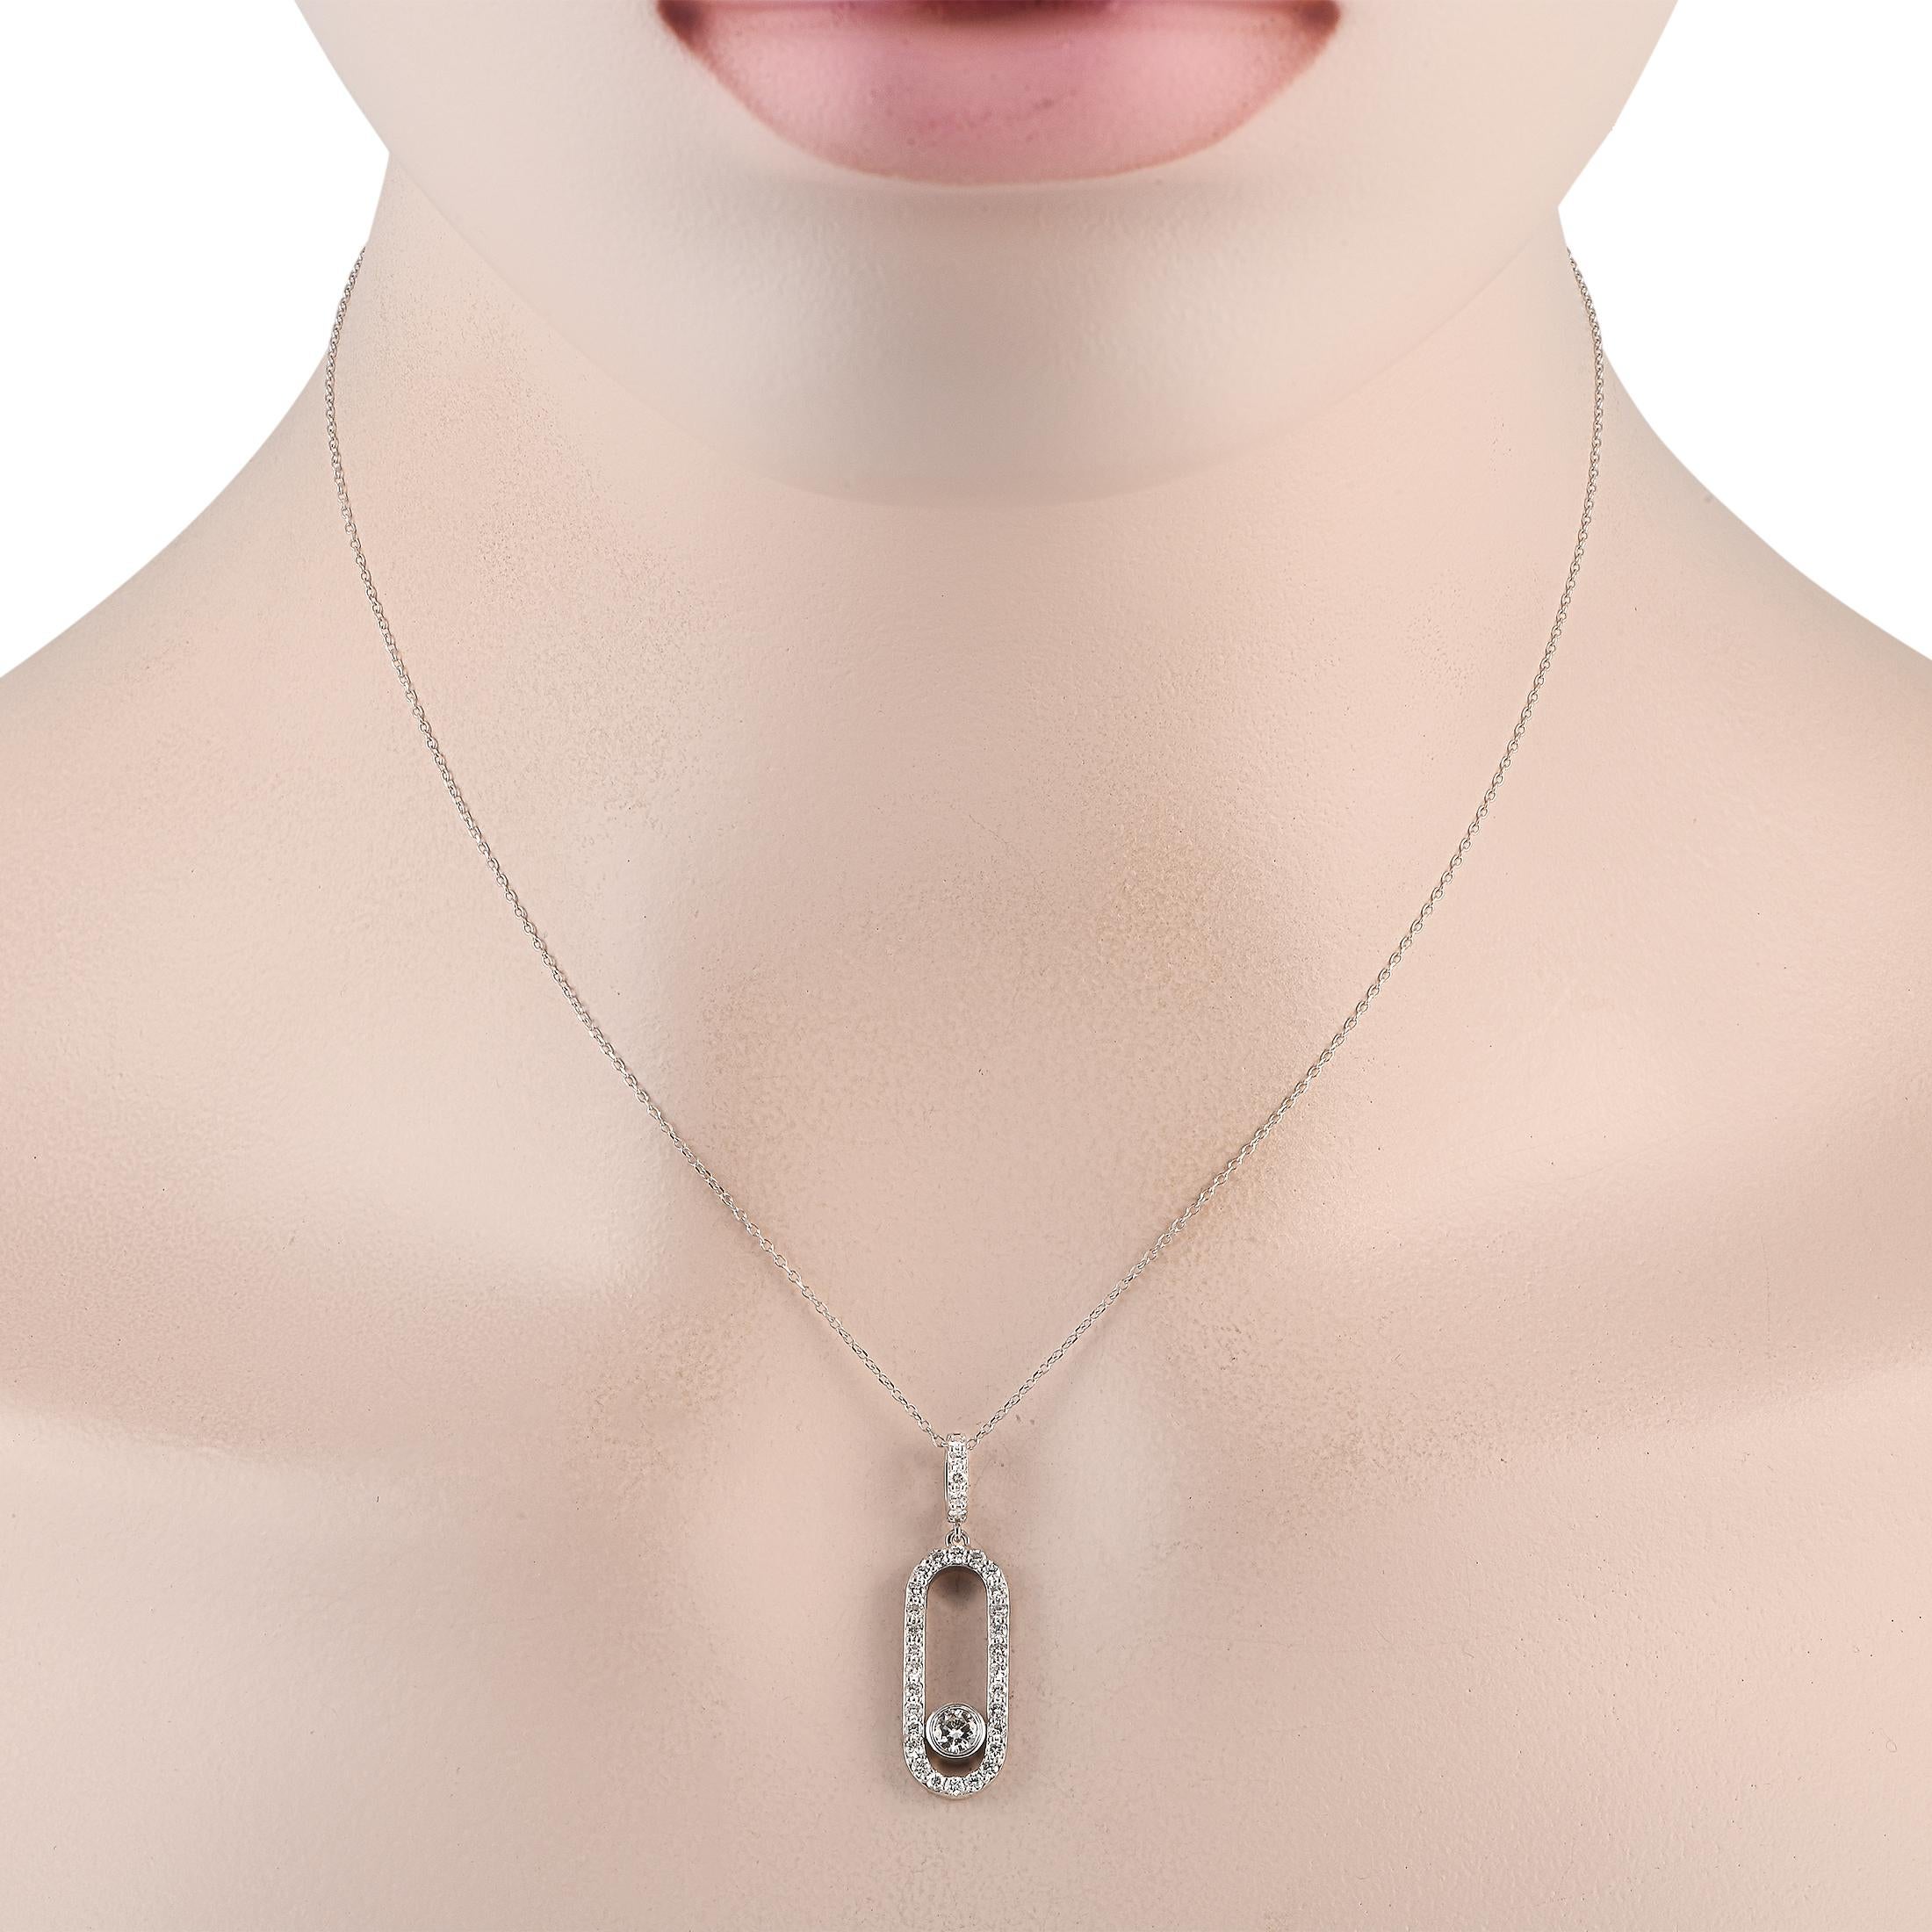 This exquisite necklace will effortlessly elevate any ensemble. Suspended from a 16” chain, a sleek pendant shines to life thanks to sparkling diamonds with a total weight of 0.70 carats. The pendant is crafted from 18K White Gold and measures 1.25”